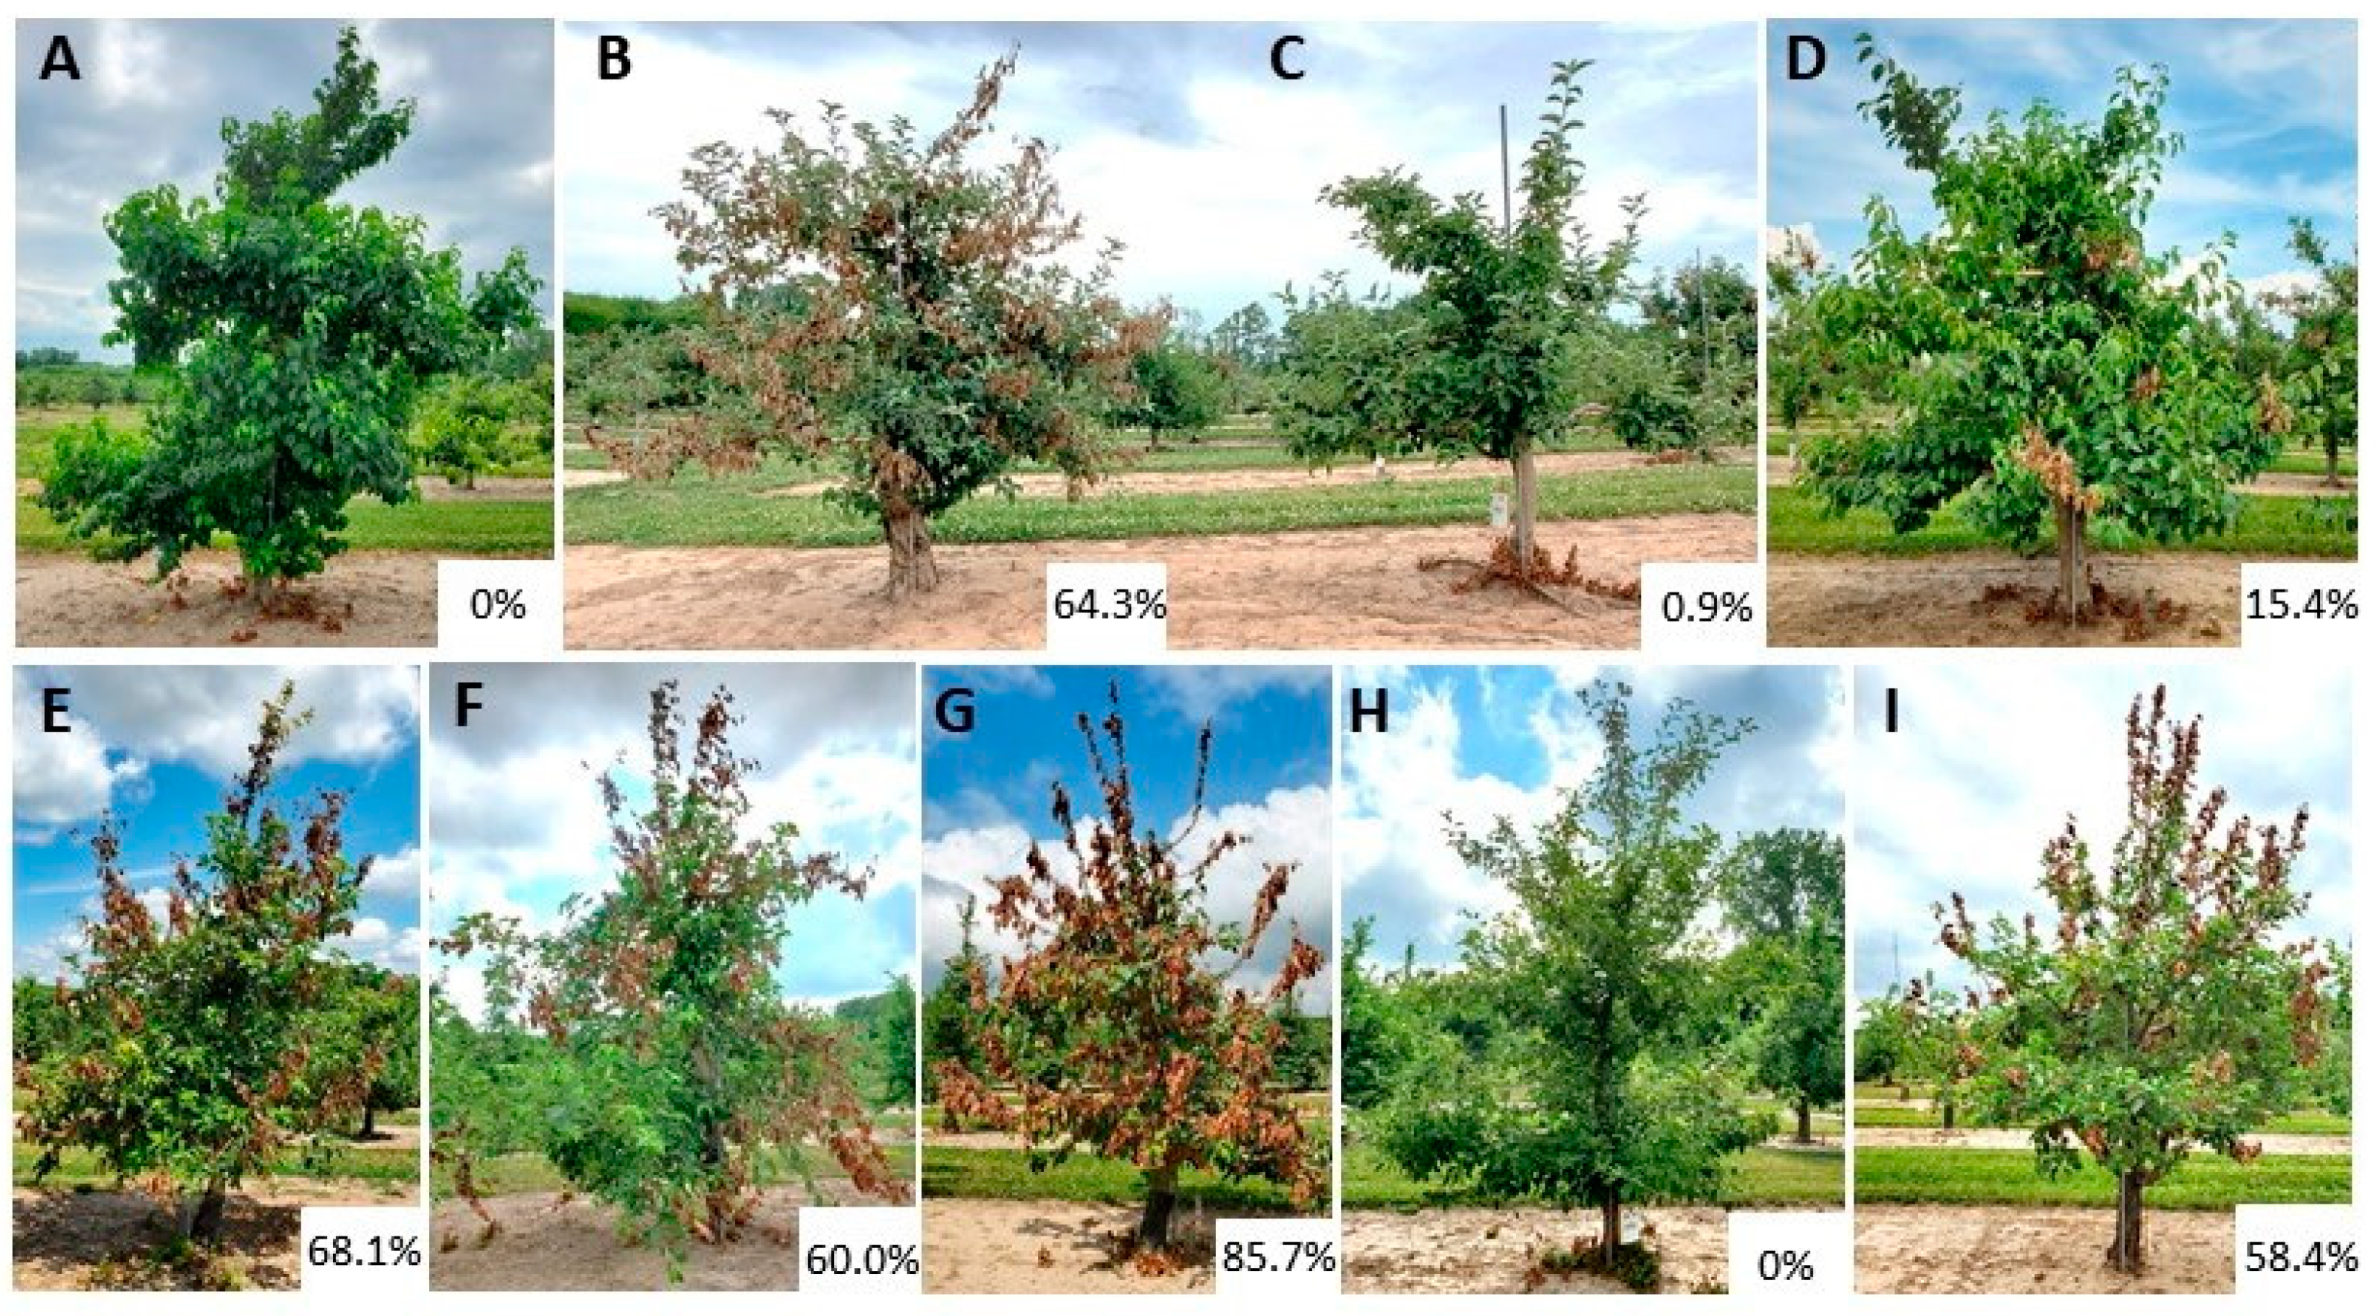 https://pub.mdpi-res.com/agronomy/agronomy-11-00144/article_deploy/html/images/agronomy-11-00144-g001.png?1610613027